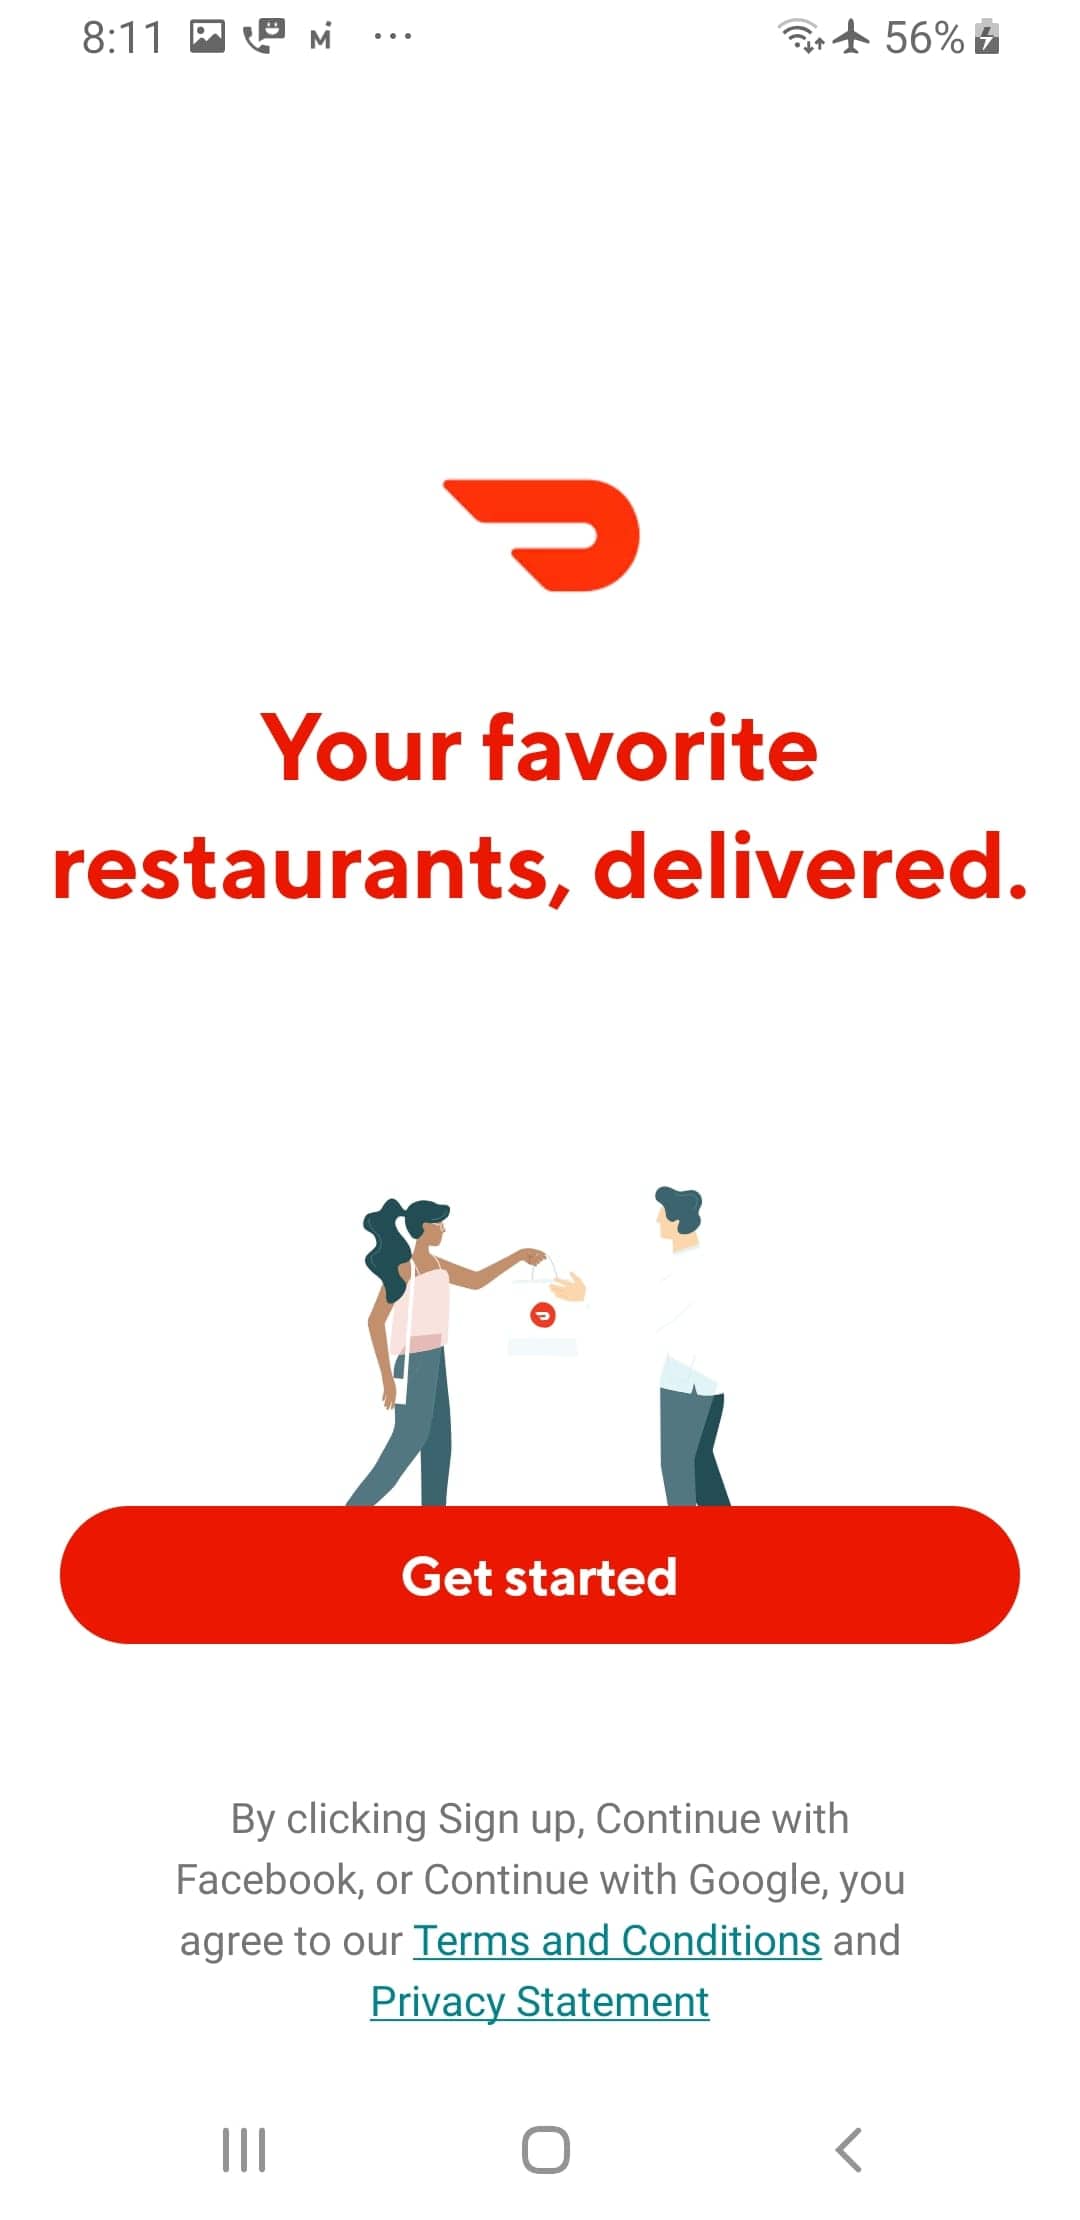 Screenshot From Our DoorDash Review